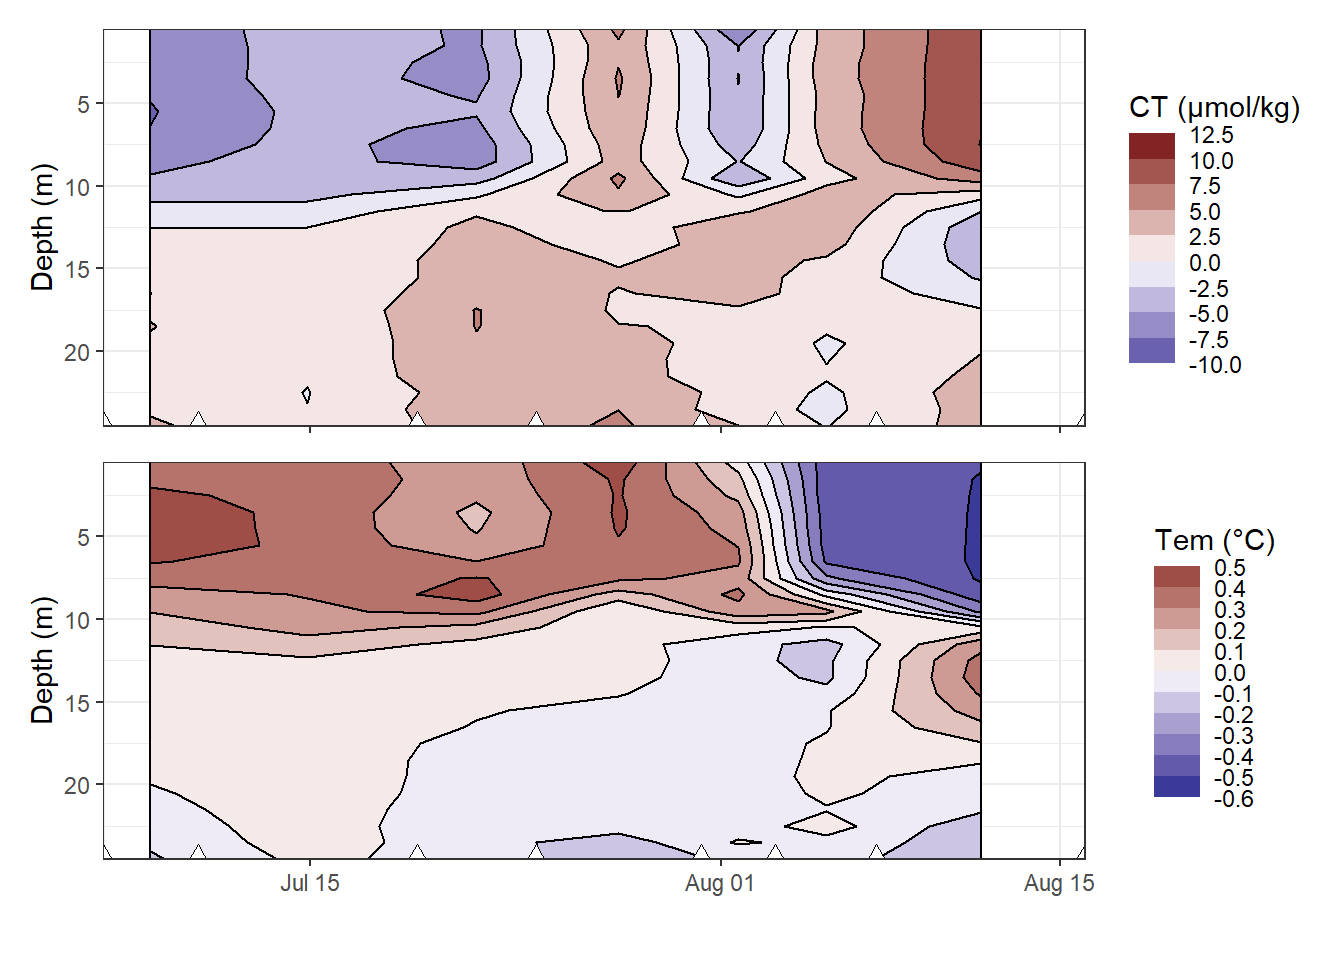 Hovmoeller plots of daily changes in C~T~ and temperature. Note that calculated  value of change (in contrast to absolute and cumulative values) are referred to the mean dates inbetween cruise, and are not extrapolated to the full observational period.